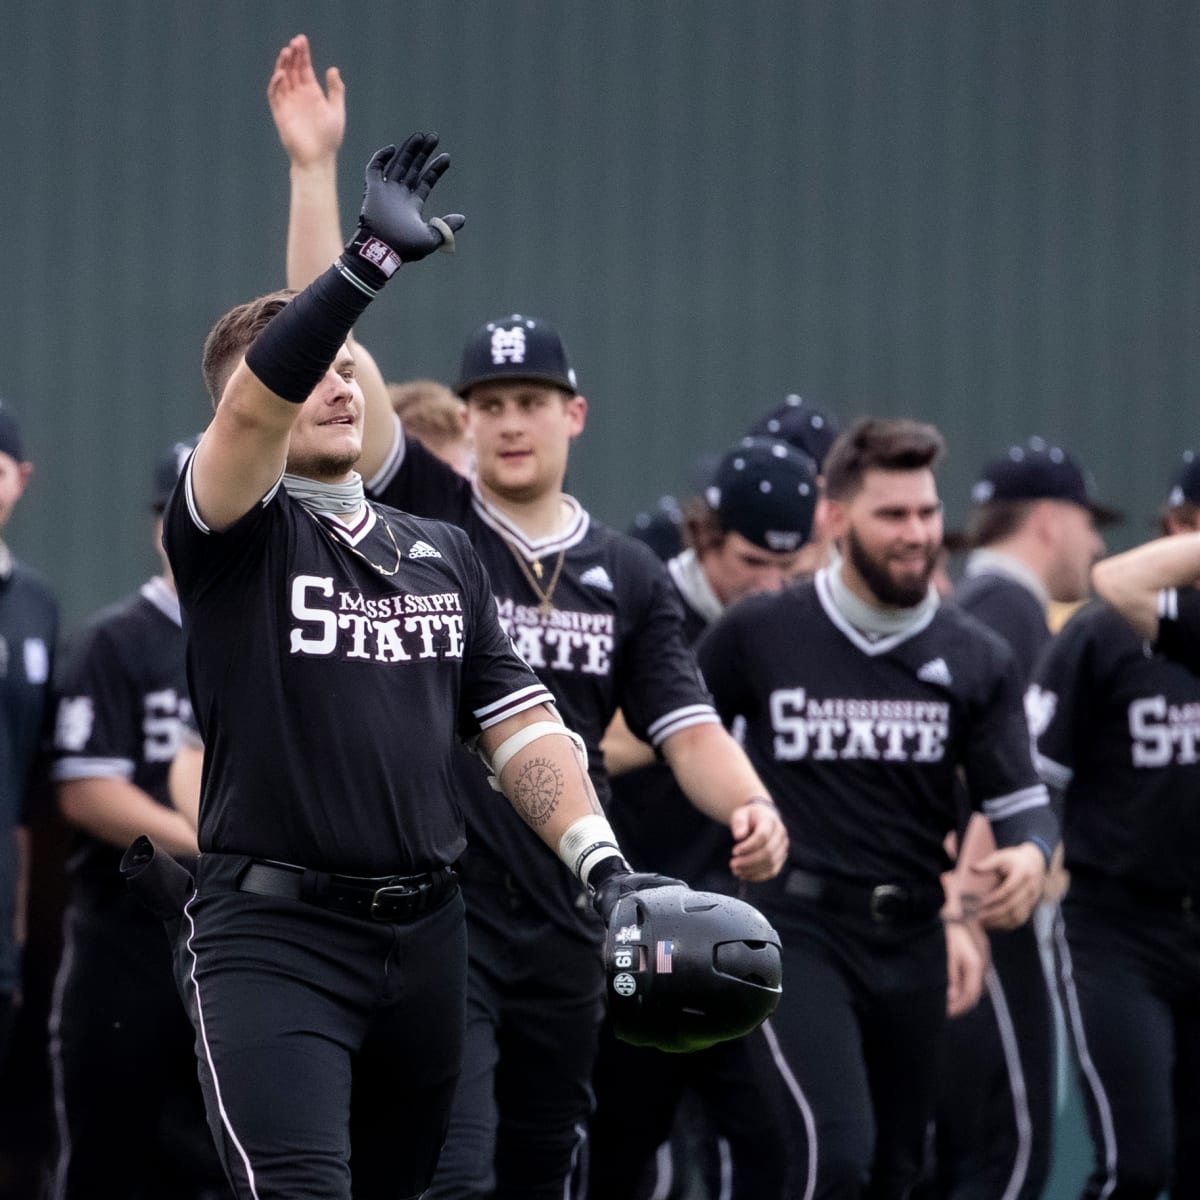 MSU Reveals New All-black Baseball Uniforms - For Whom the Cowbell Tolls